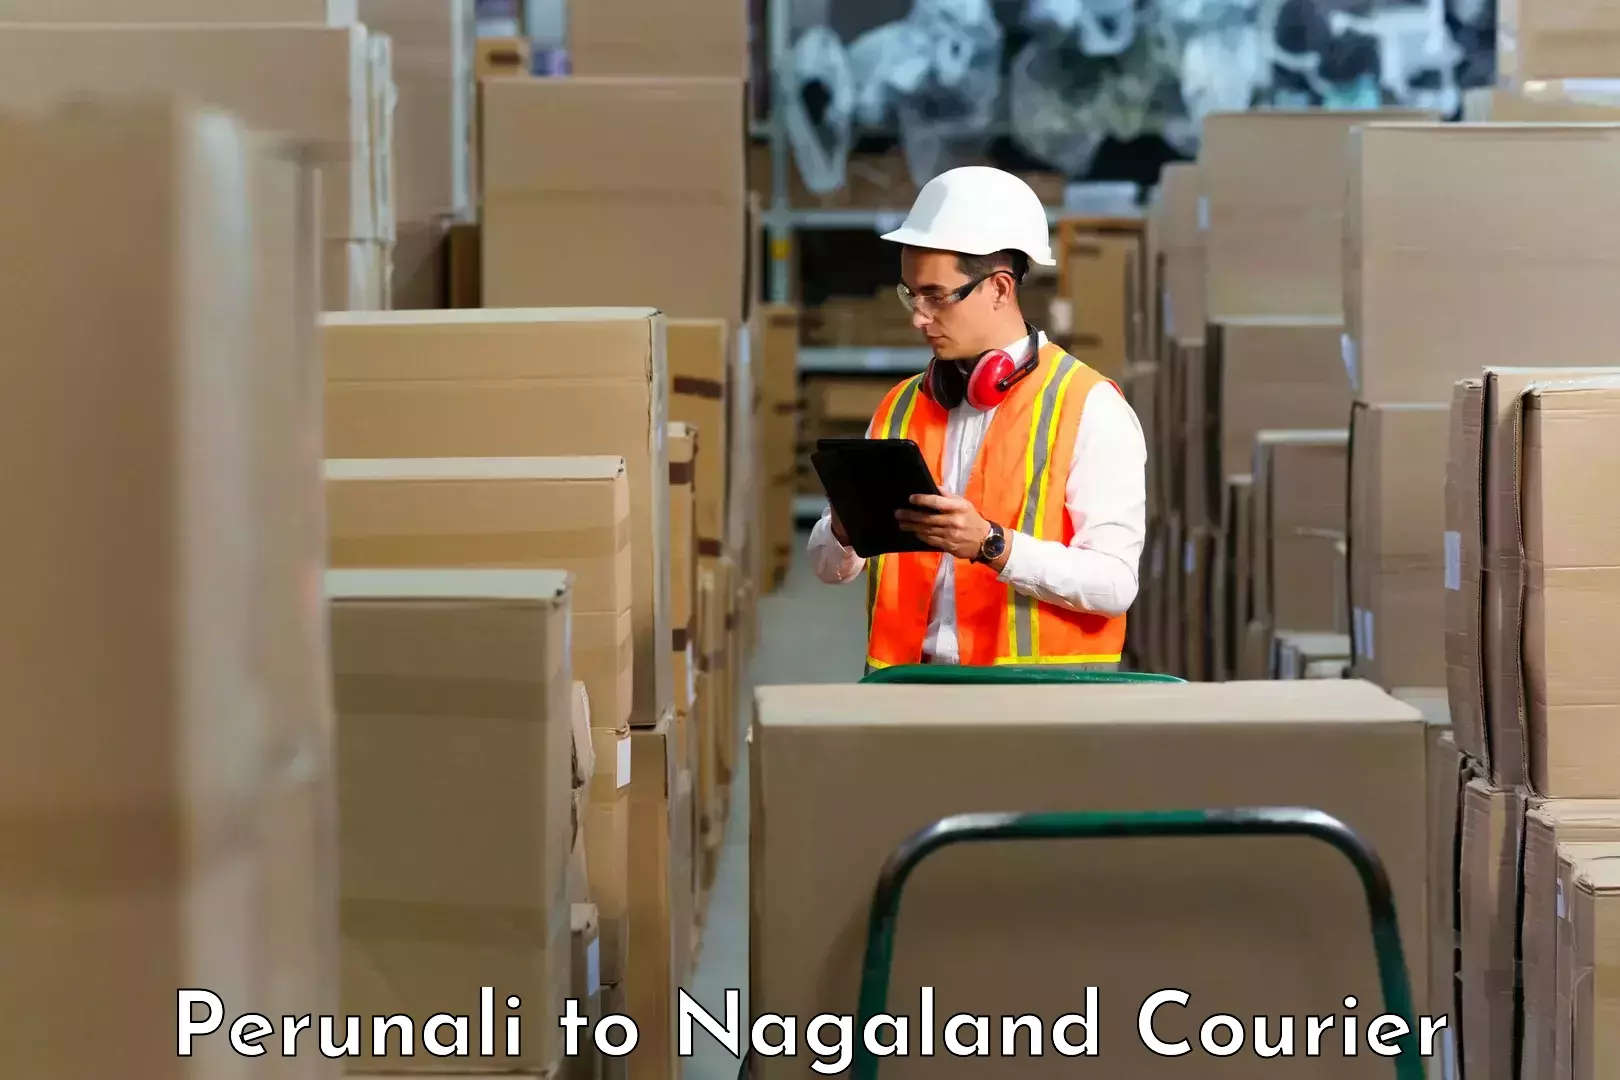 Flexible delivery scheduling Perunali to Nagaland